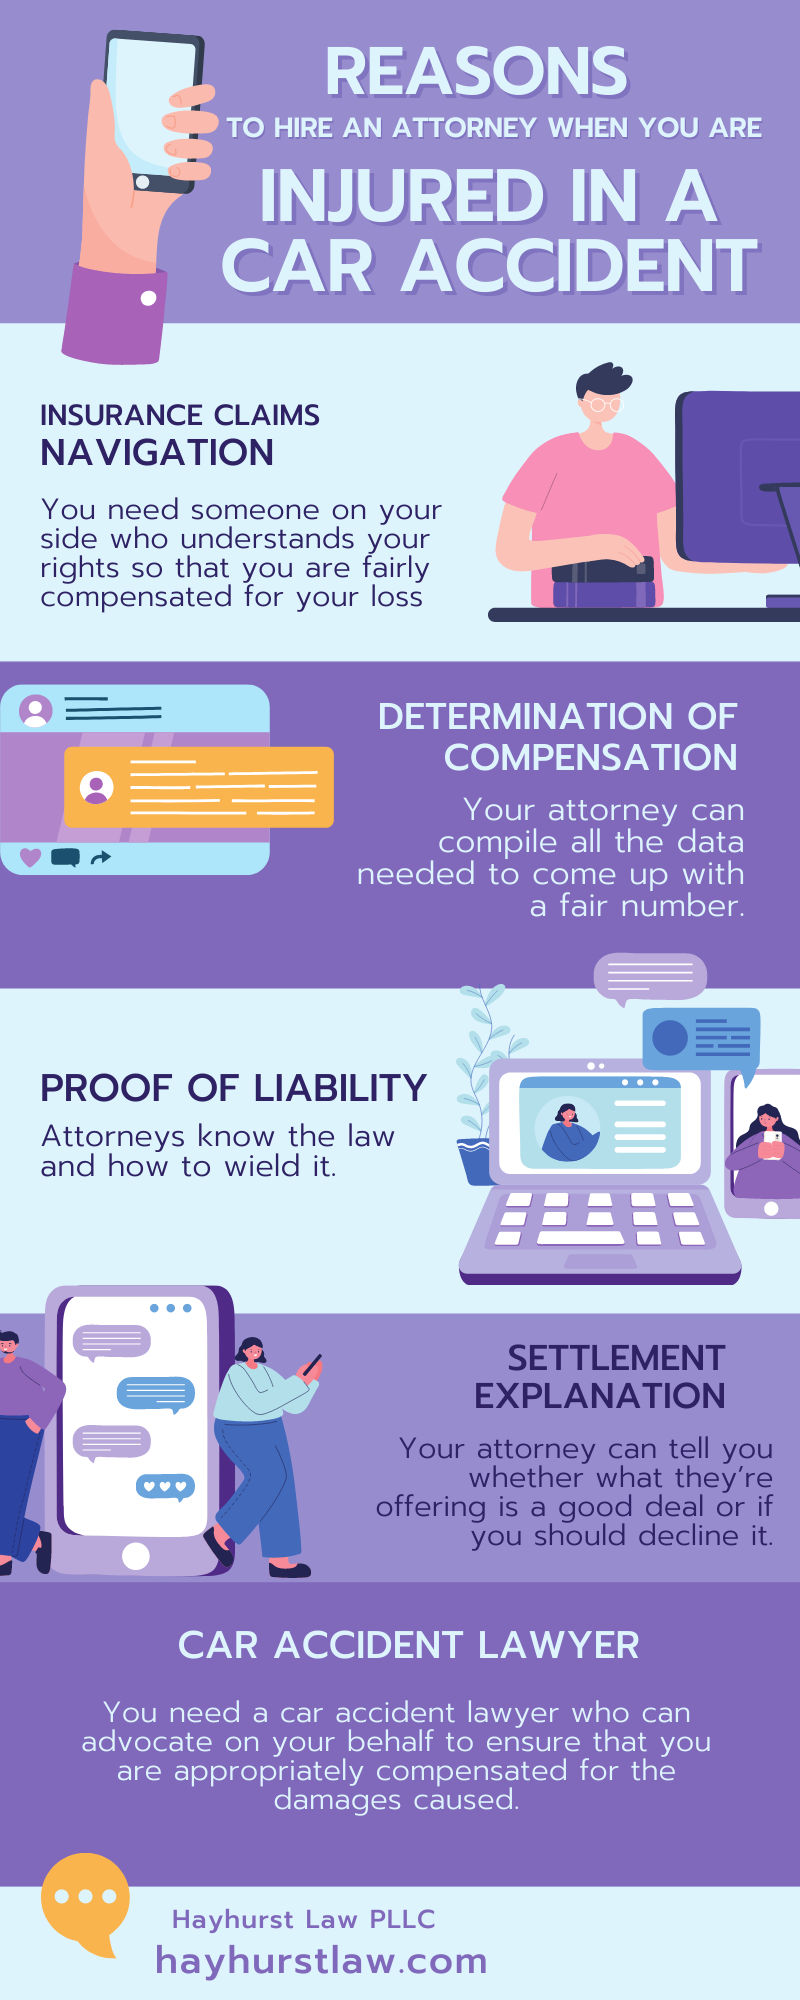 Reasons To Hire Attorney After Car Accident Infographic